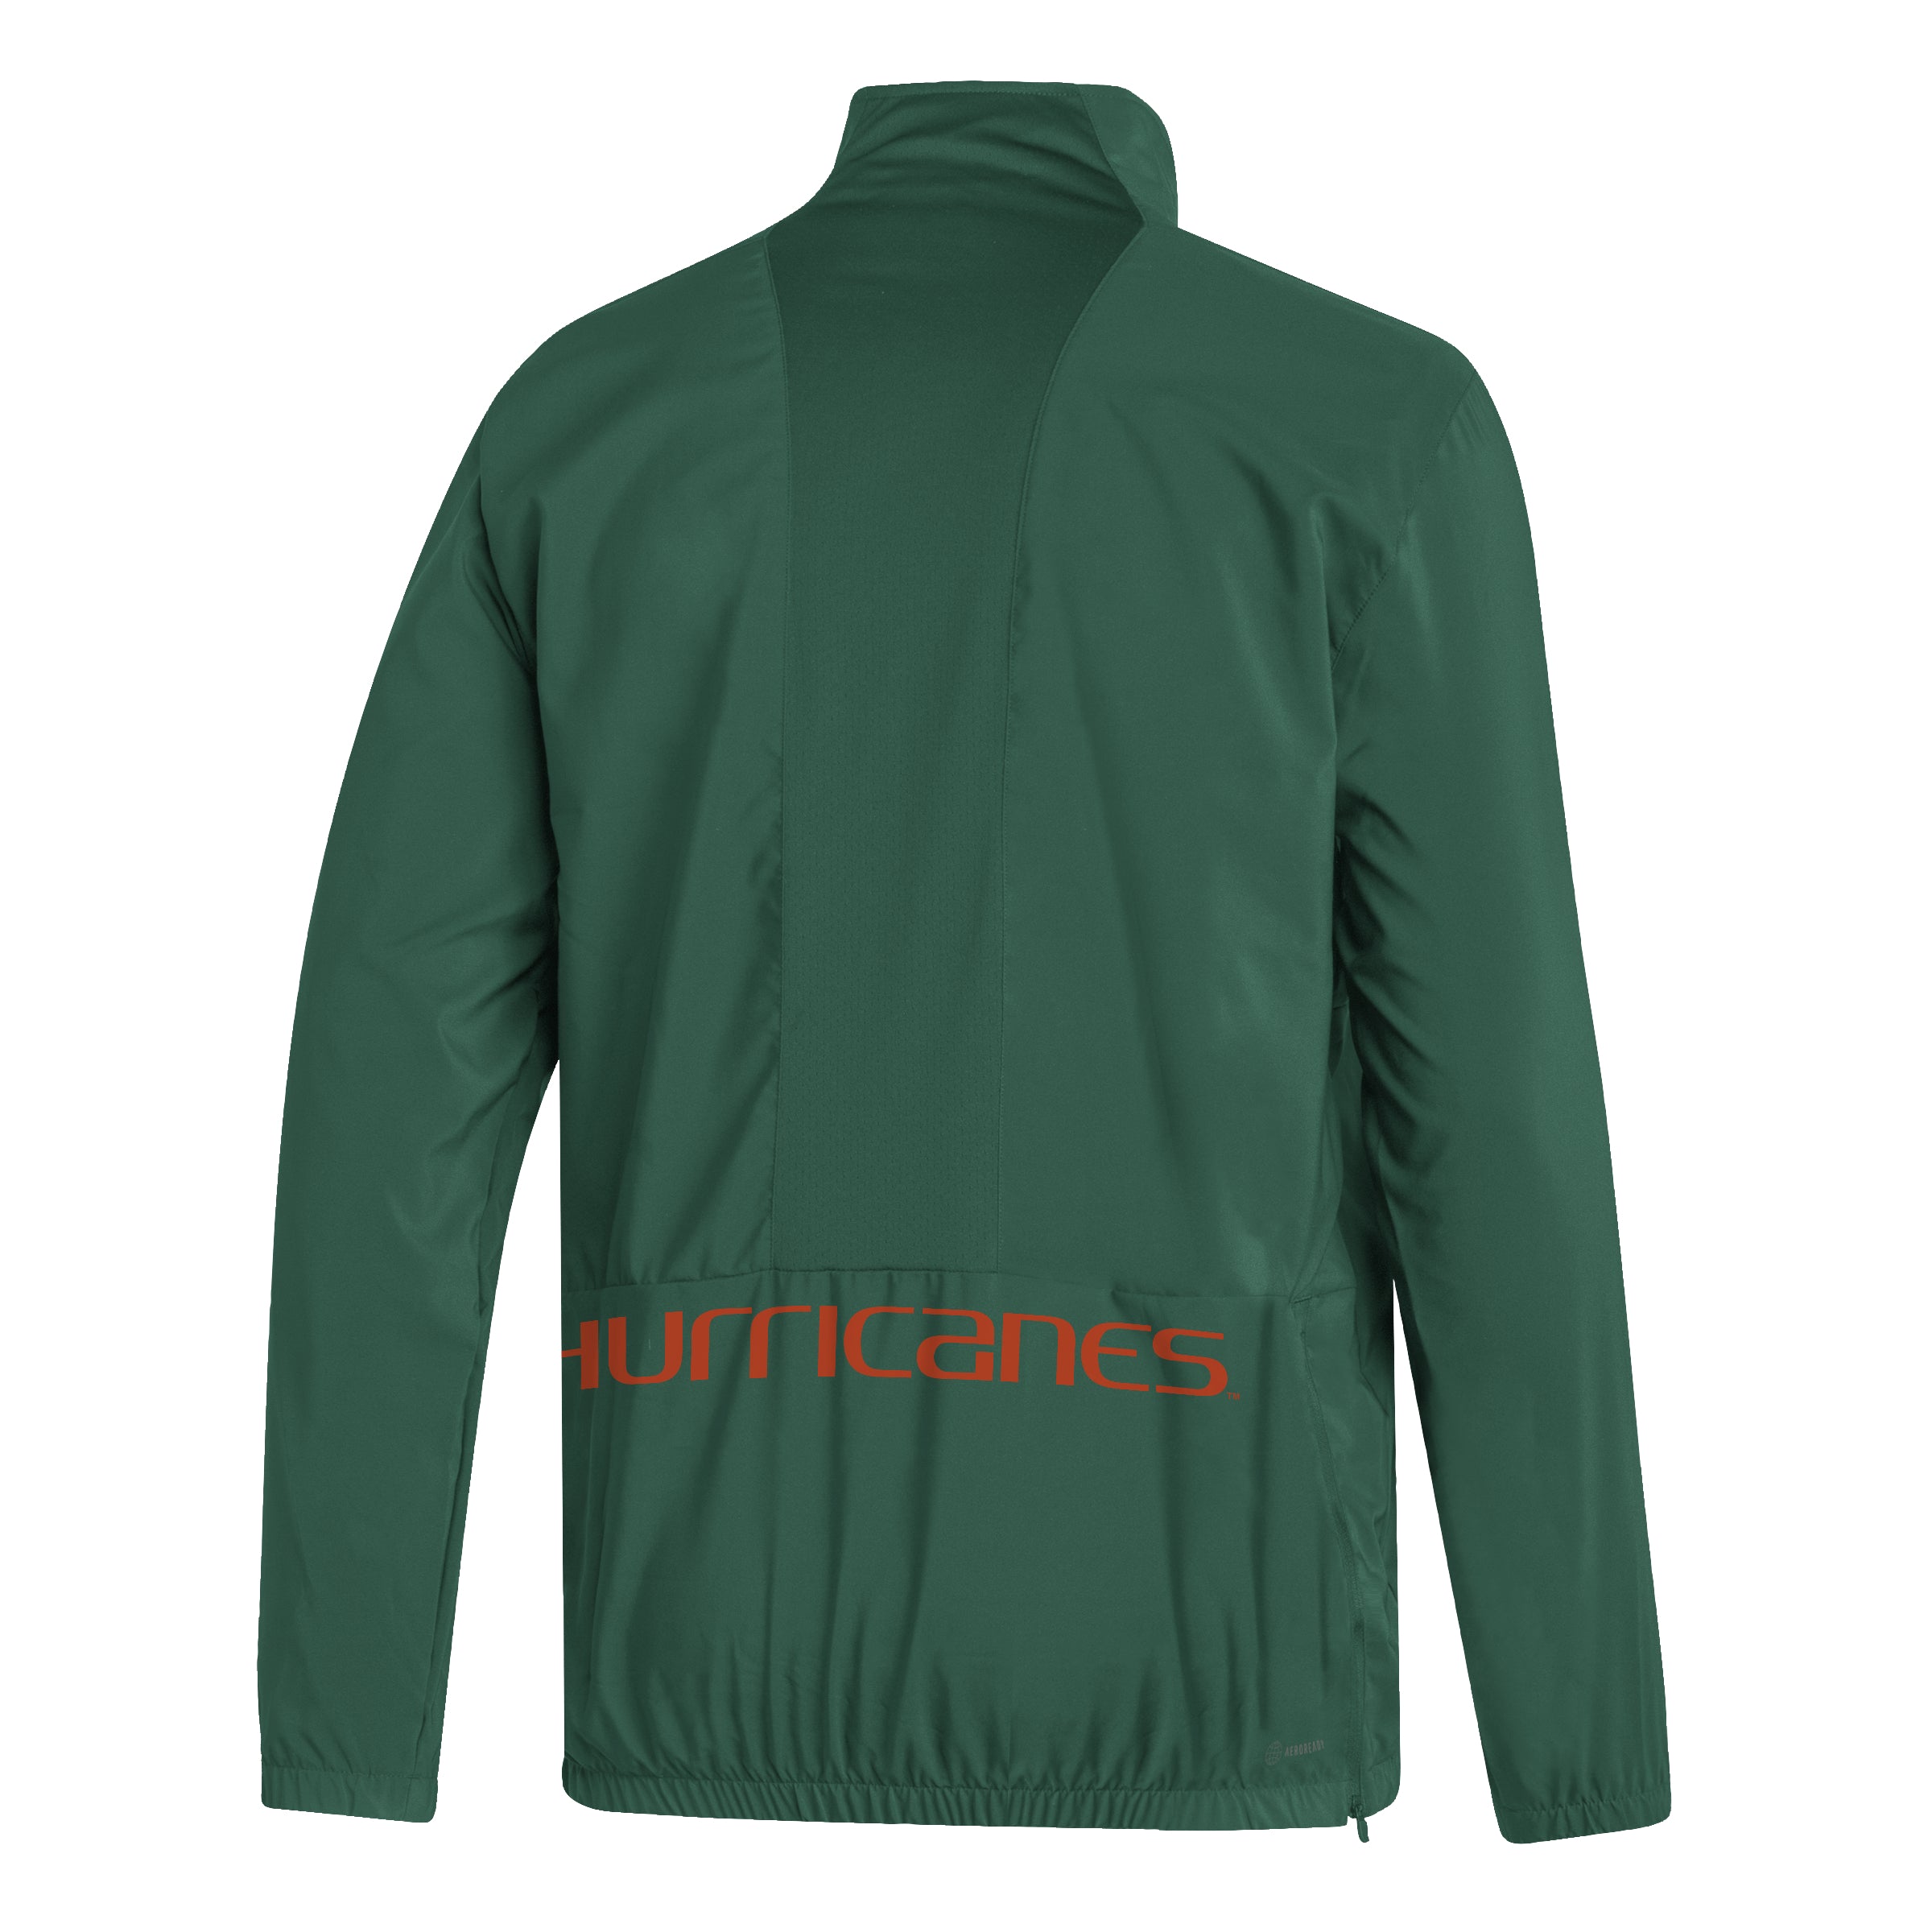 Miami Hurricanes adidas Only the Best 1/2 Zip Pullover Jacket - Green